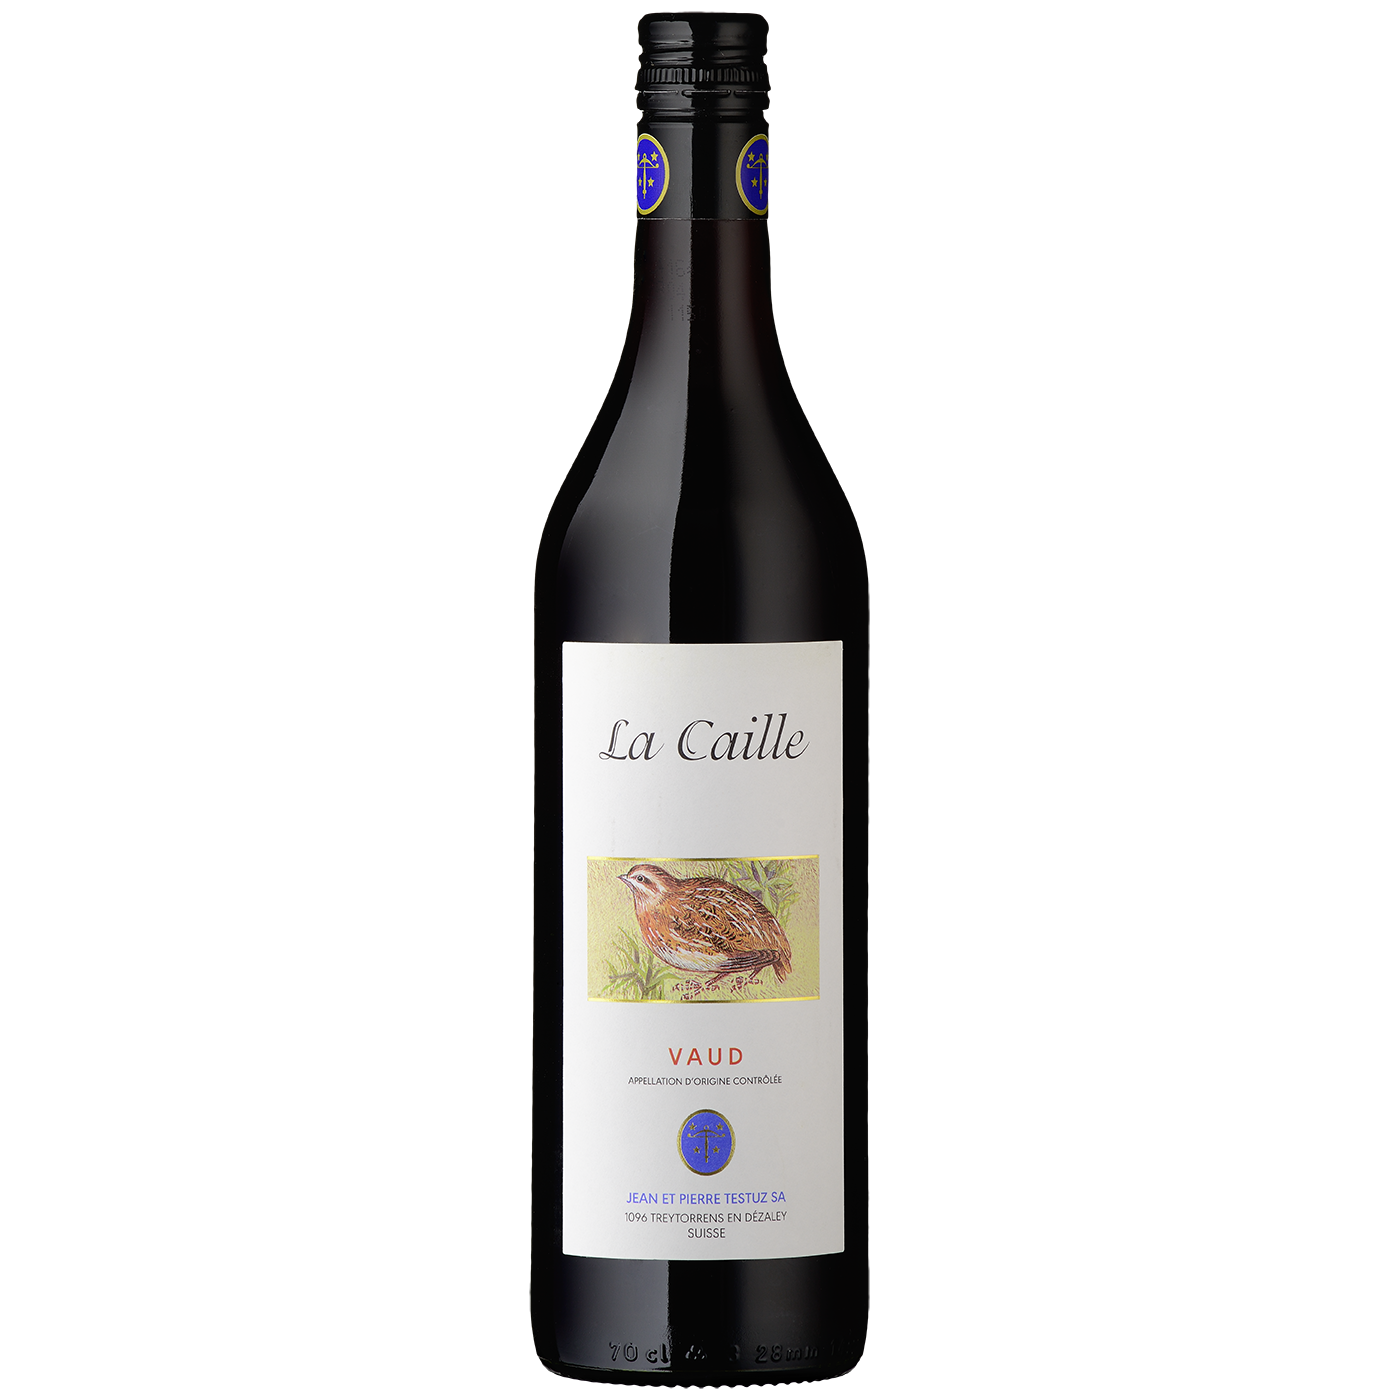 La Caille, Gamay